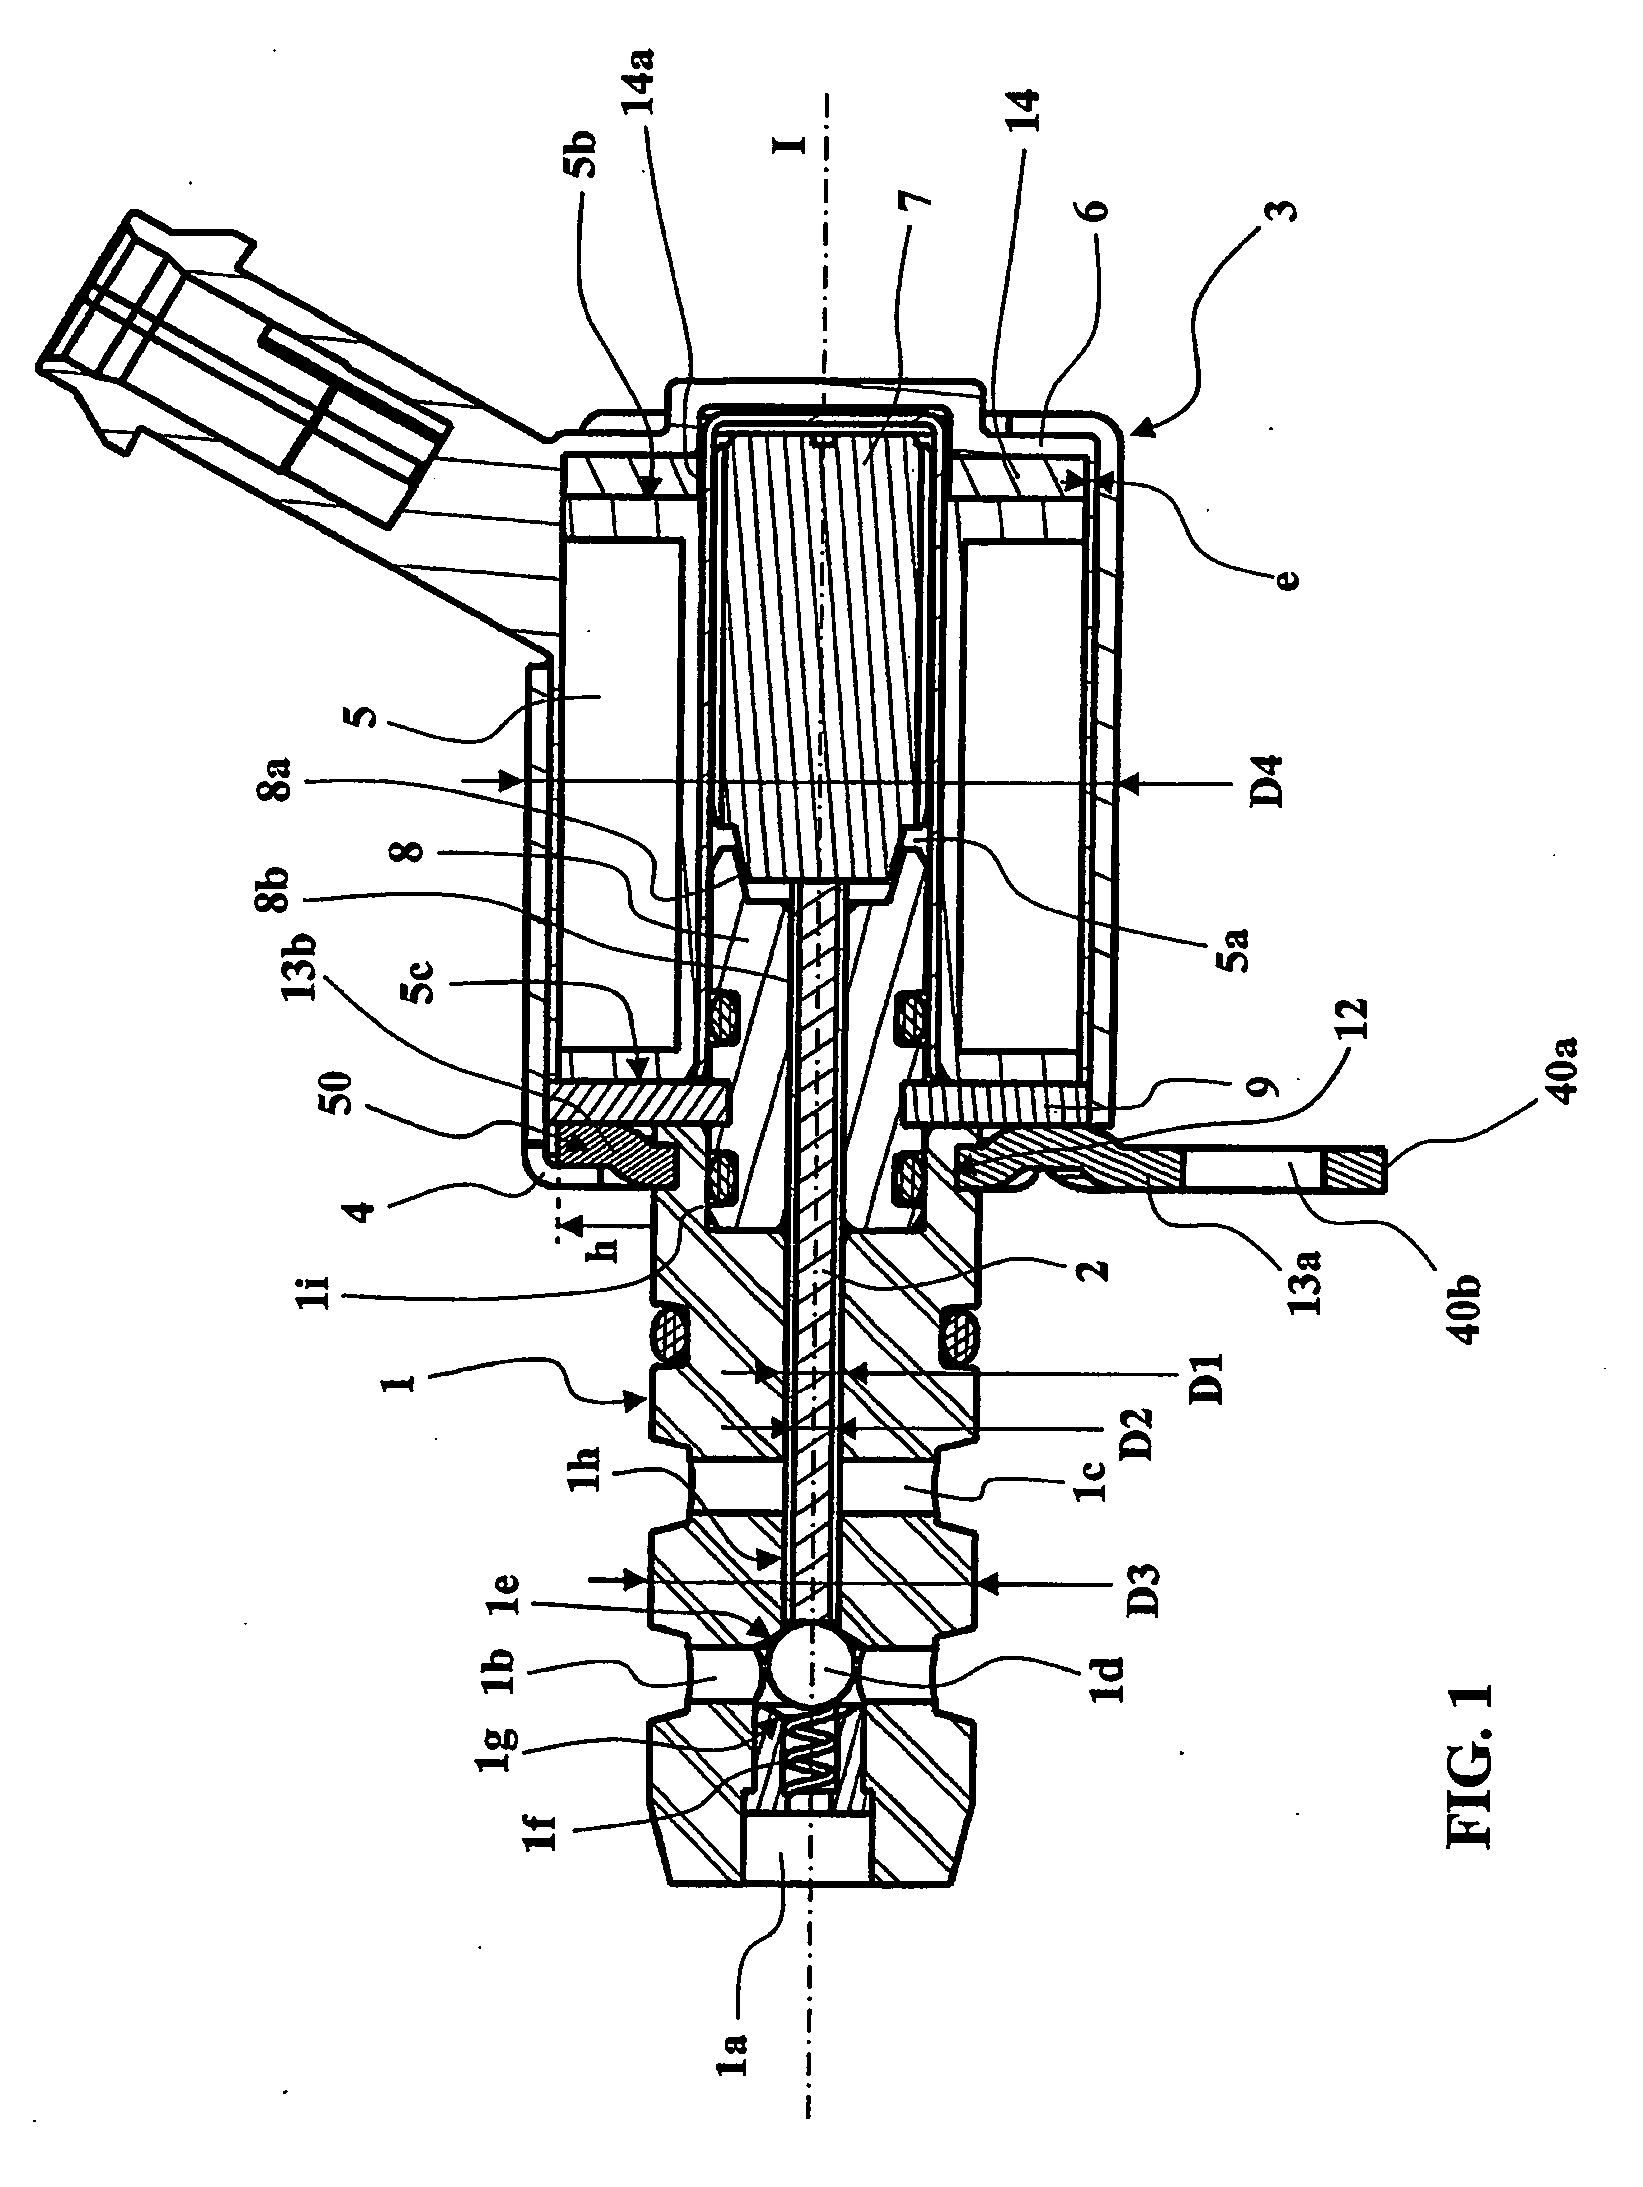 Solenoid valve with fitted shoulder